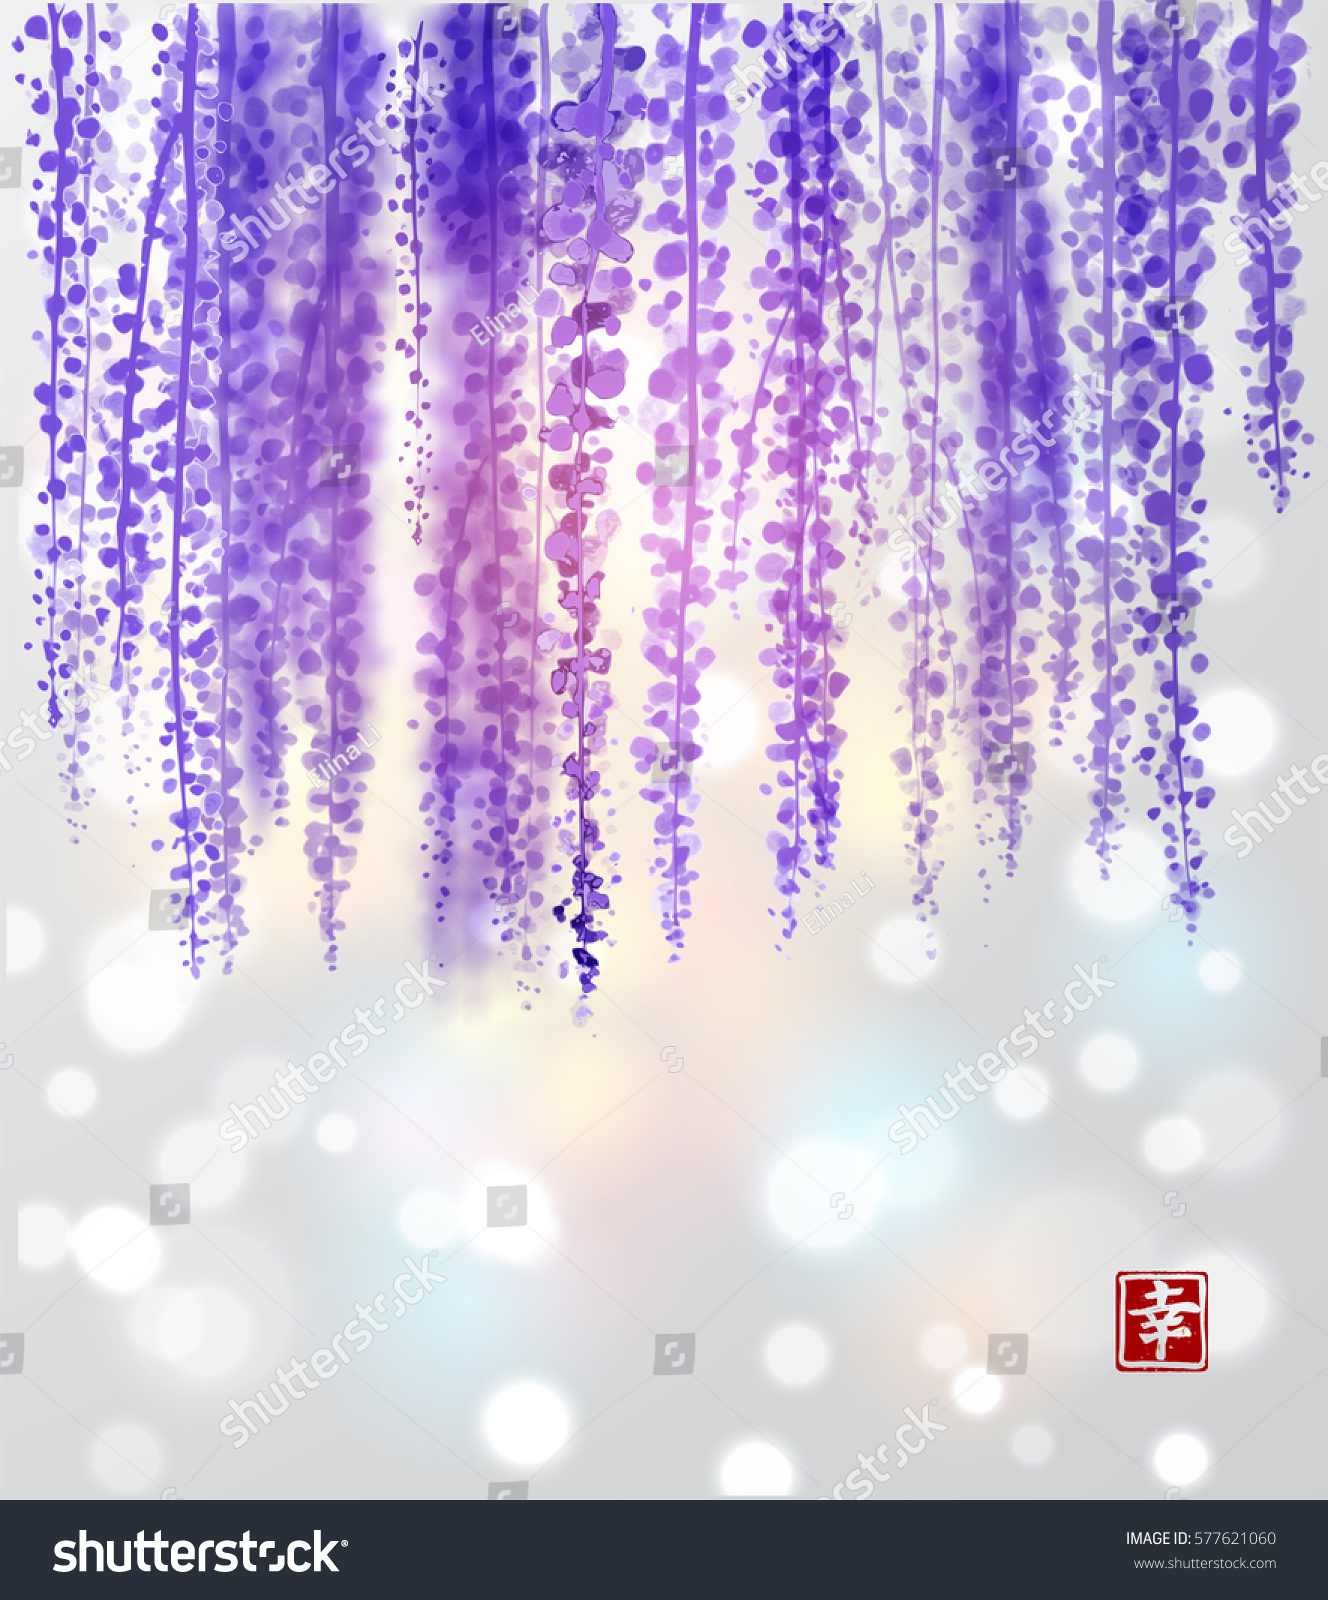 SVG of Wisteria hand drawn with ink on white glowing background. Contains hieroglyph - happiness. Traditional oriental ink painting sumi-e, u-sin, go-hua. Bunches of flowers. svg